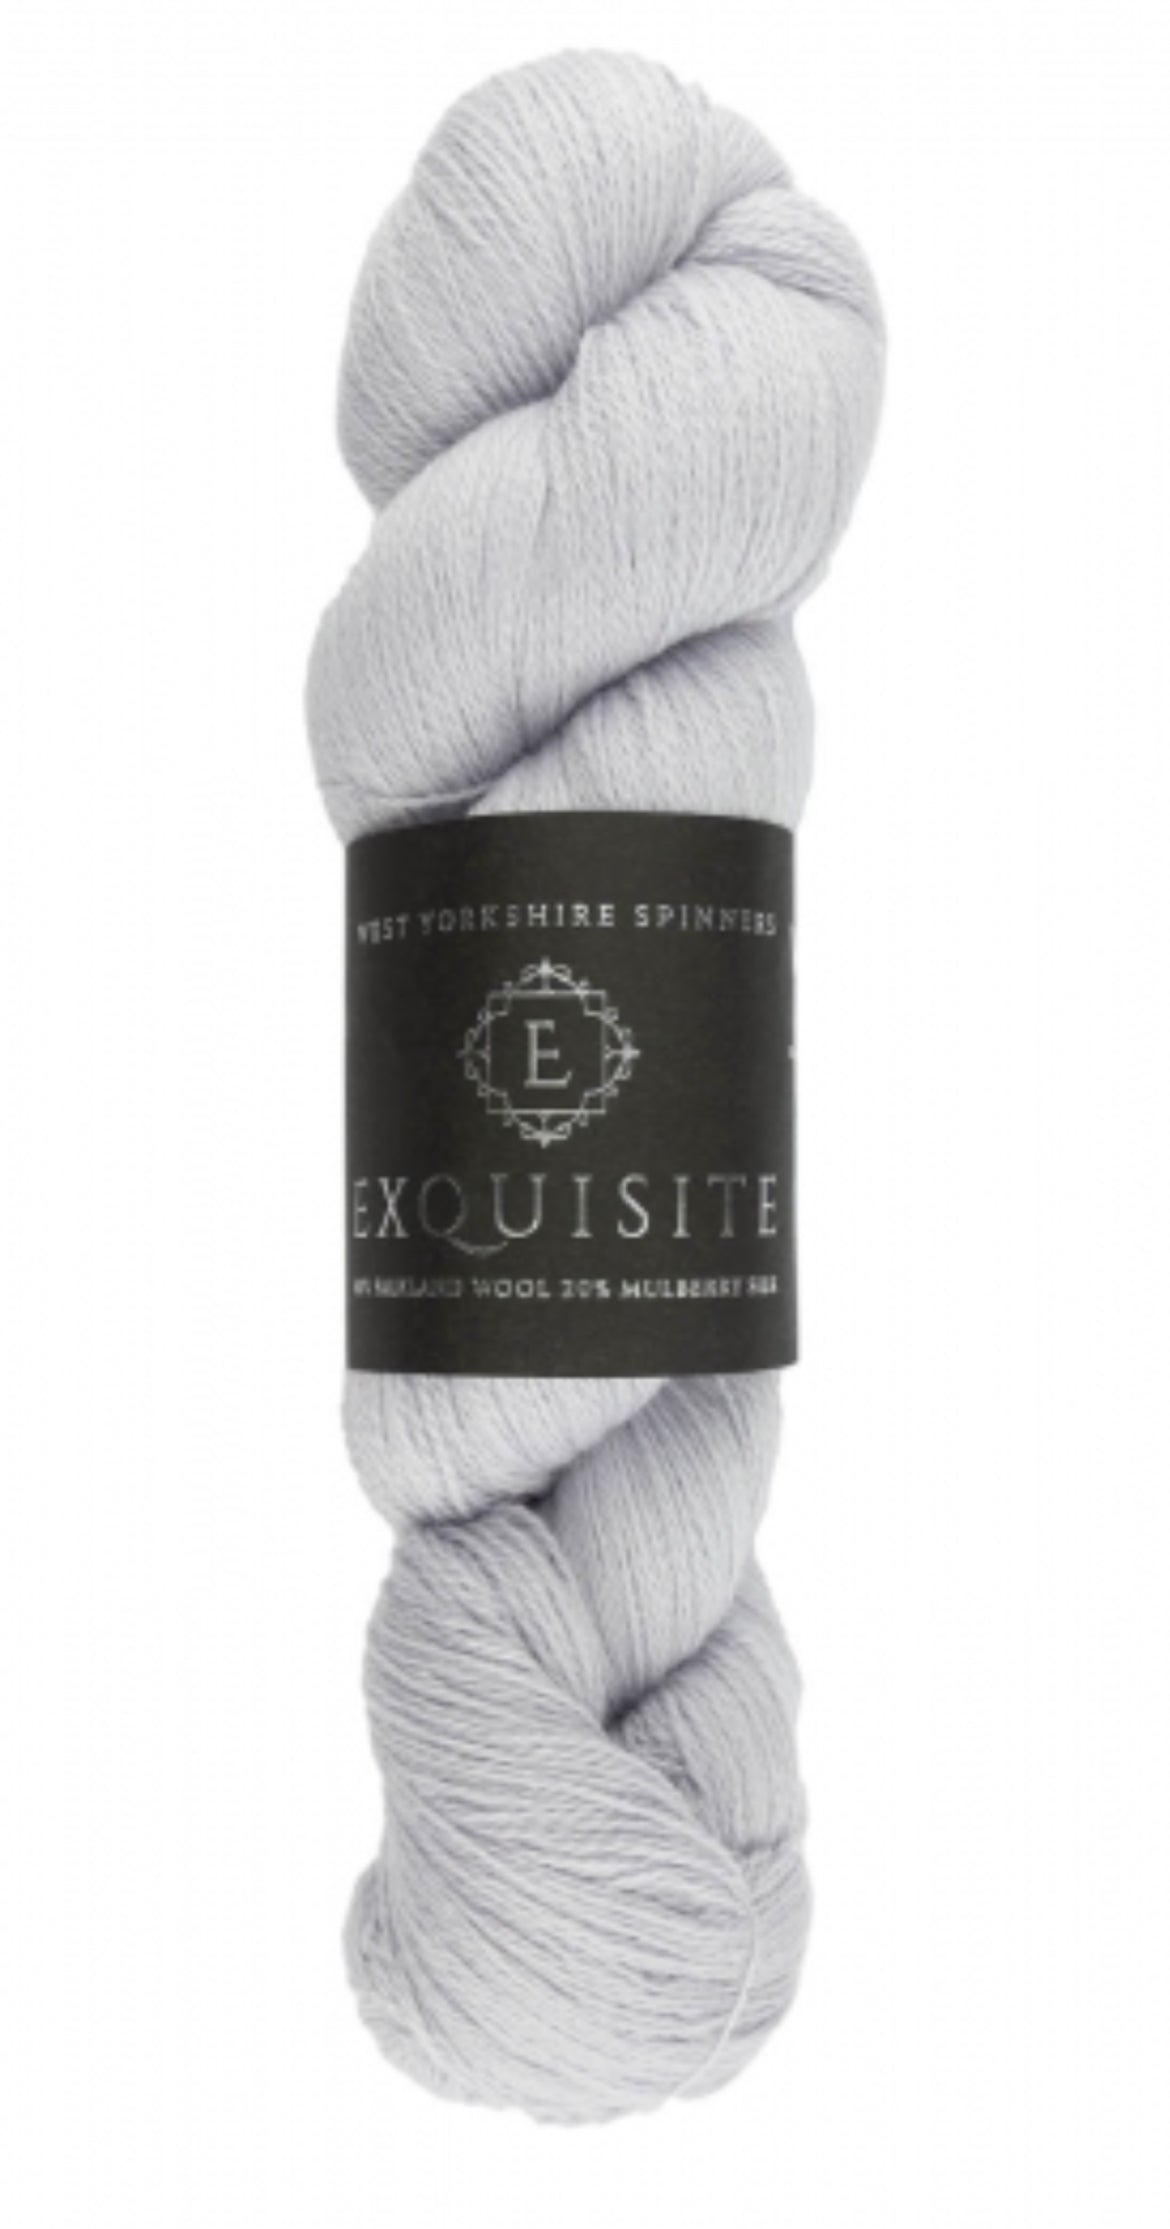 West Yorkshire Spinners Exquisite Lace